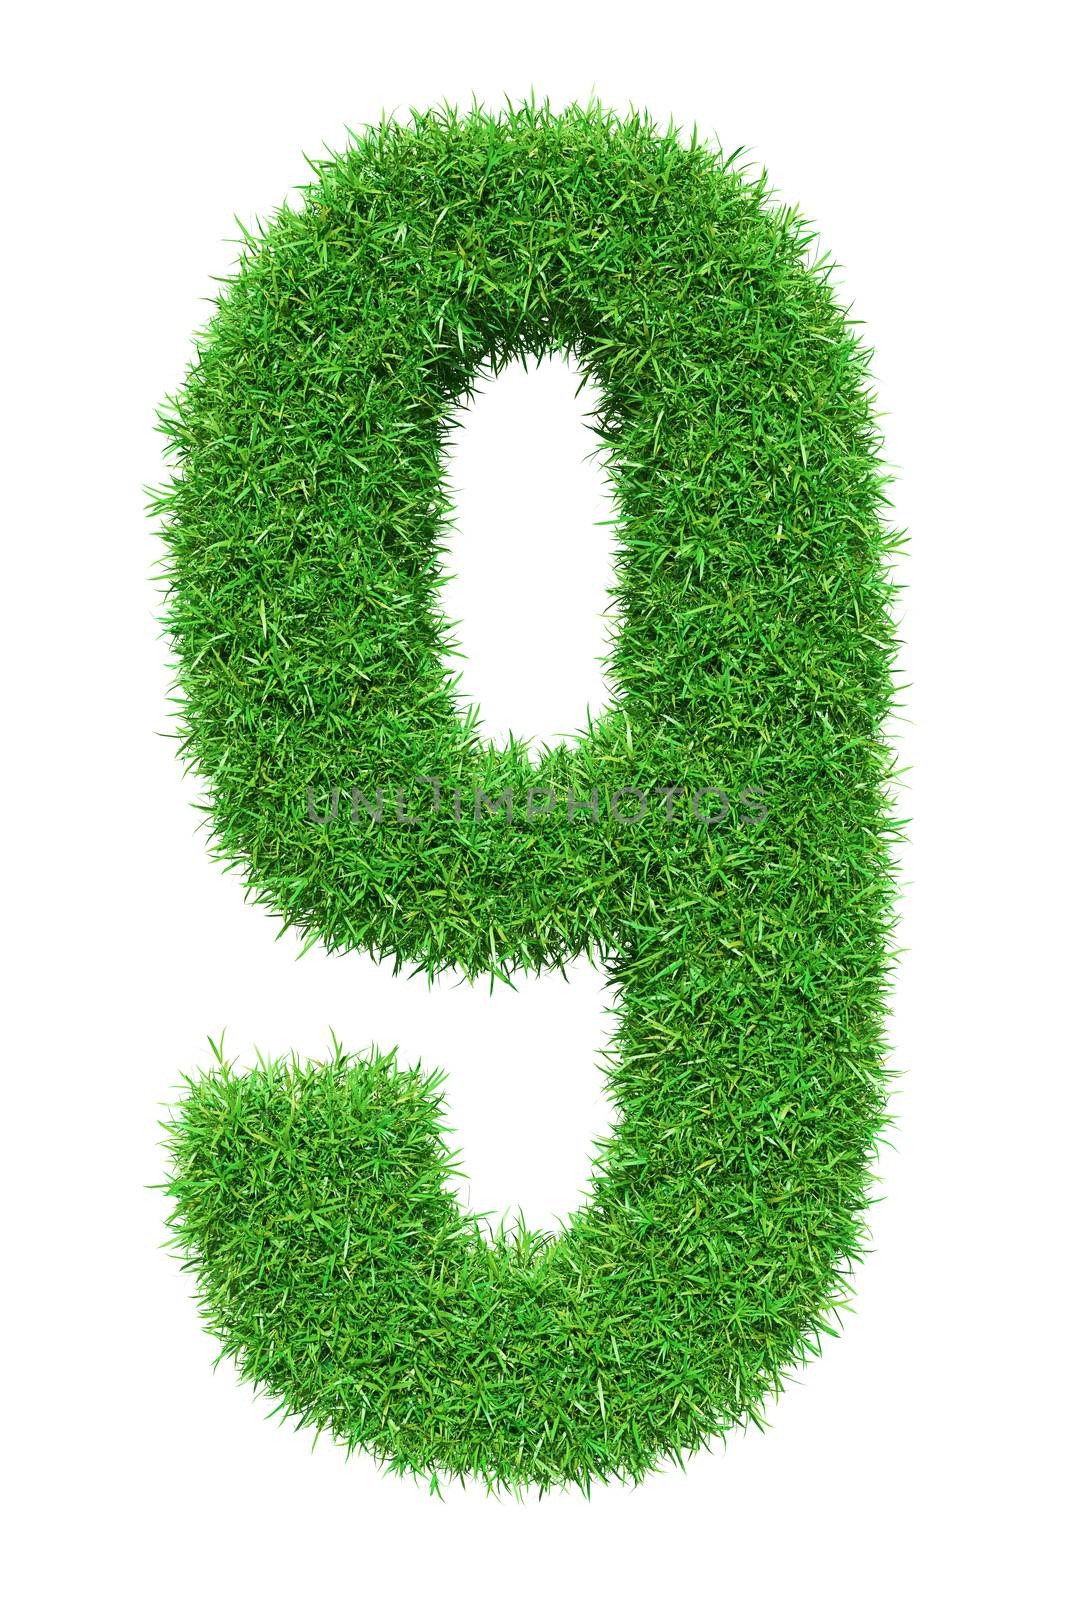 Green grass number 9, isolated on white background. 3D illustration